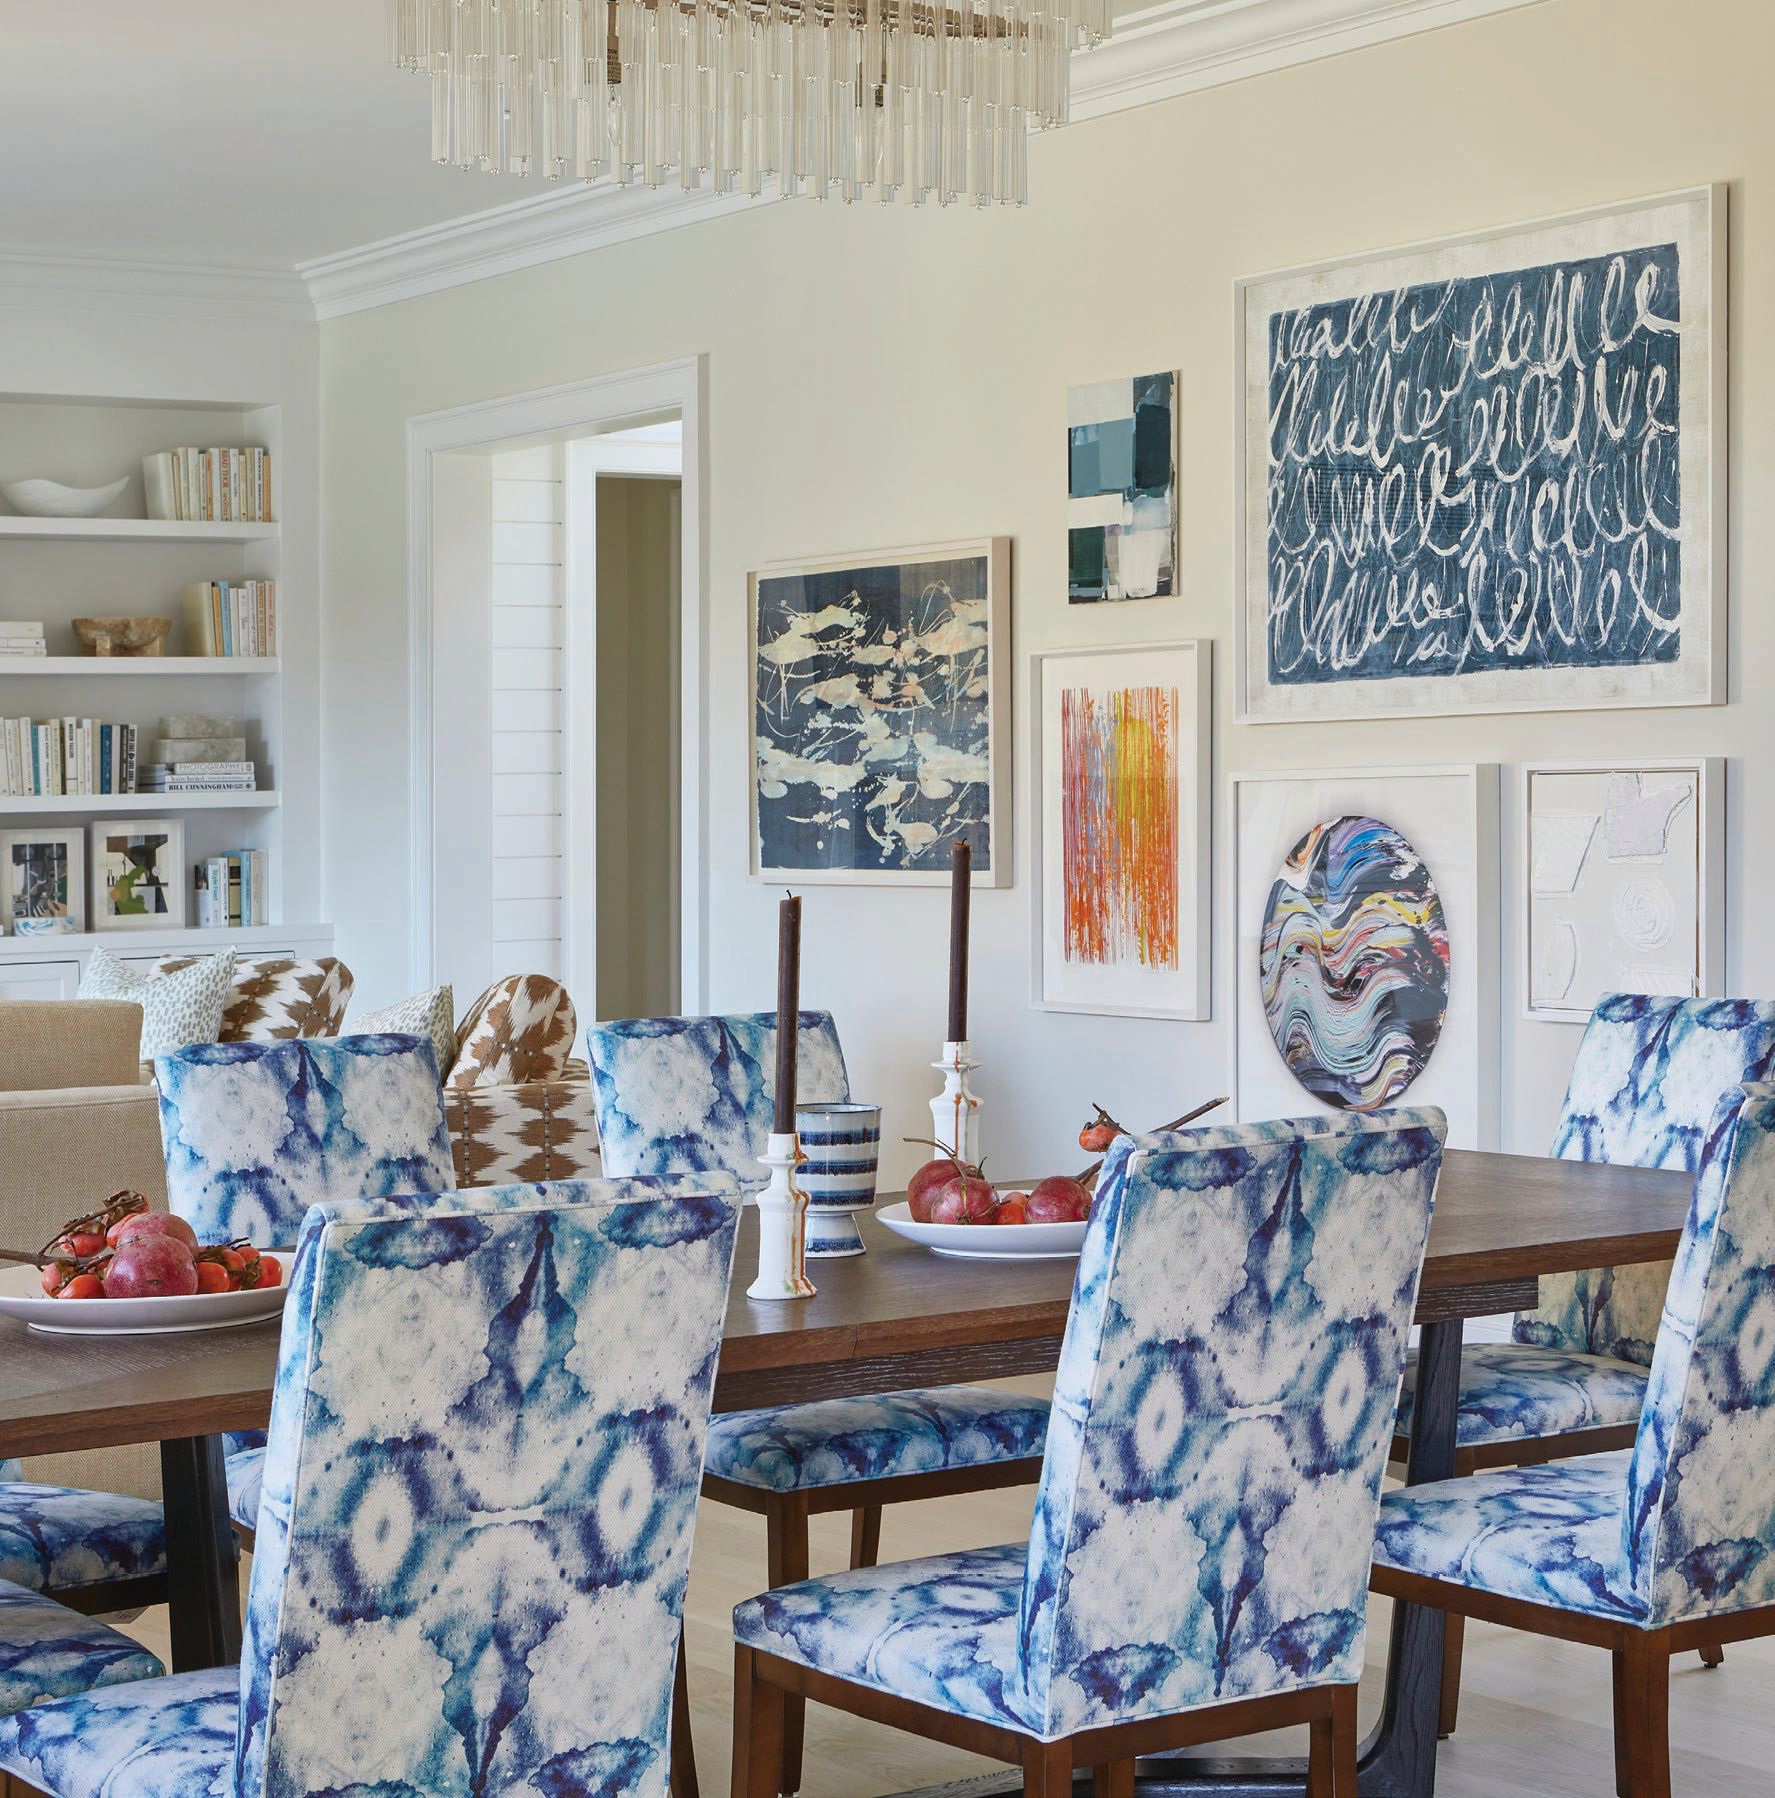 Embodying a true summer house, the home showcases an array of colorful prints and artwork that open up the space and give unique character to each and every room. PHOTOGRAPHED BY JACOB SNAVELY